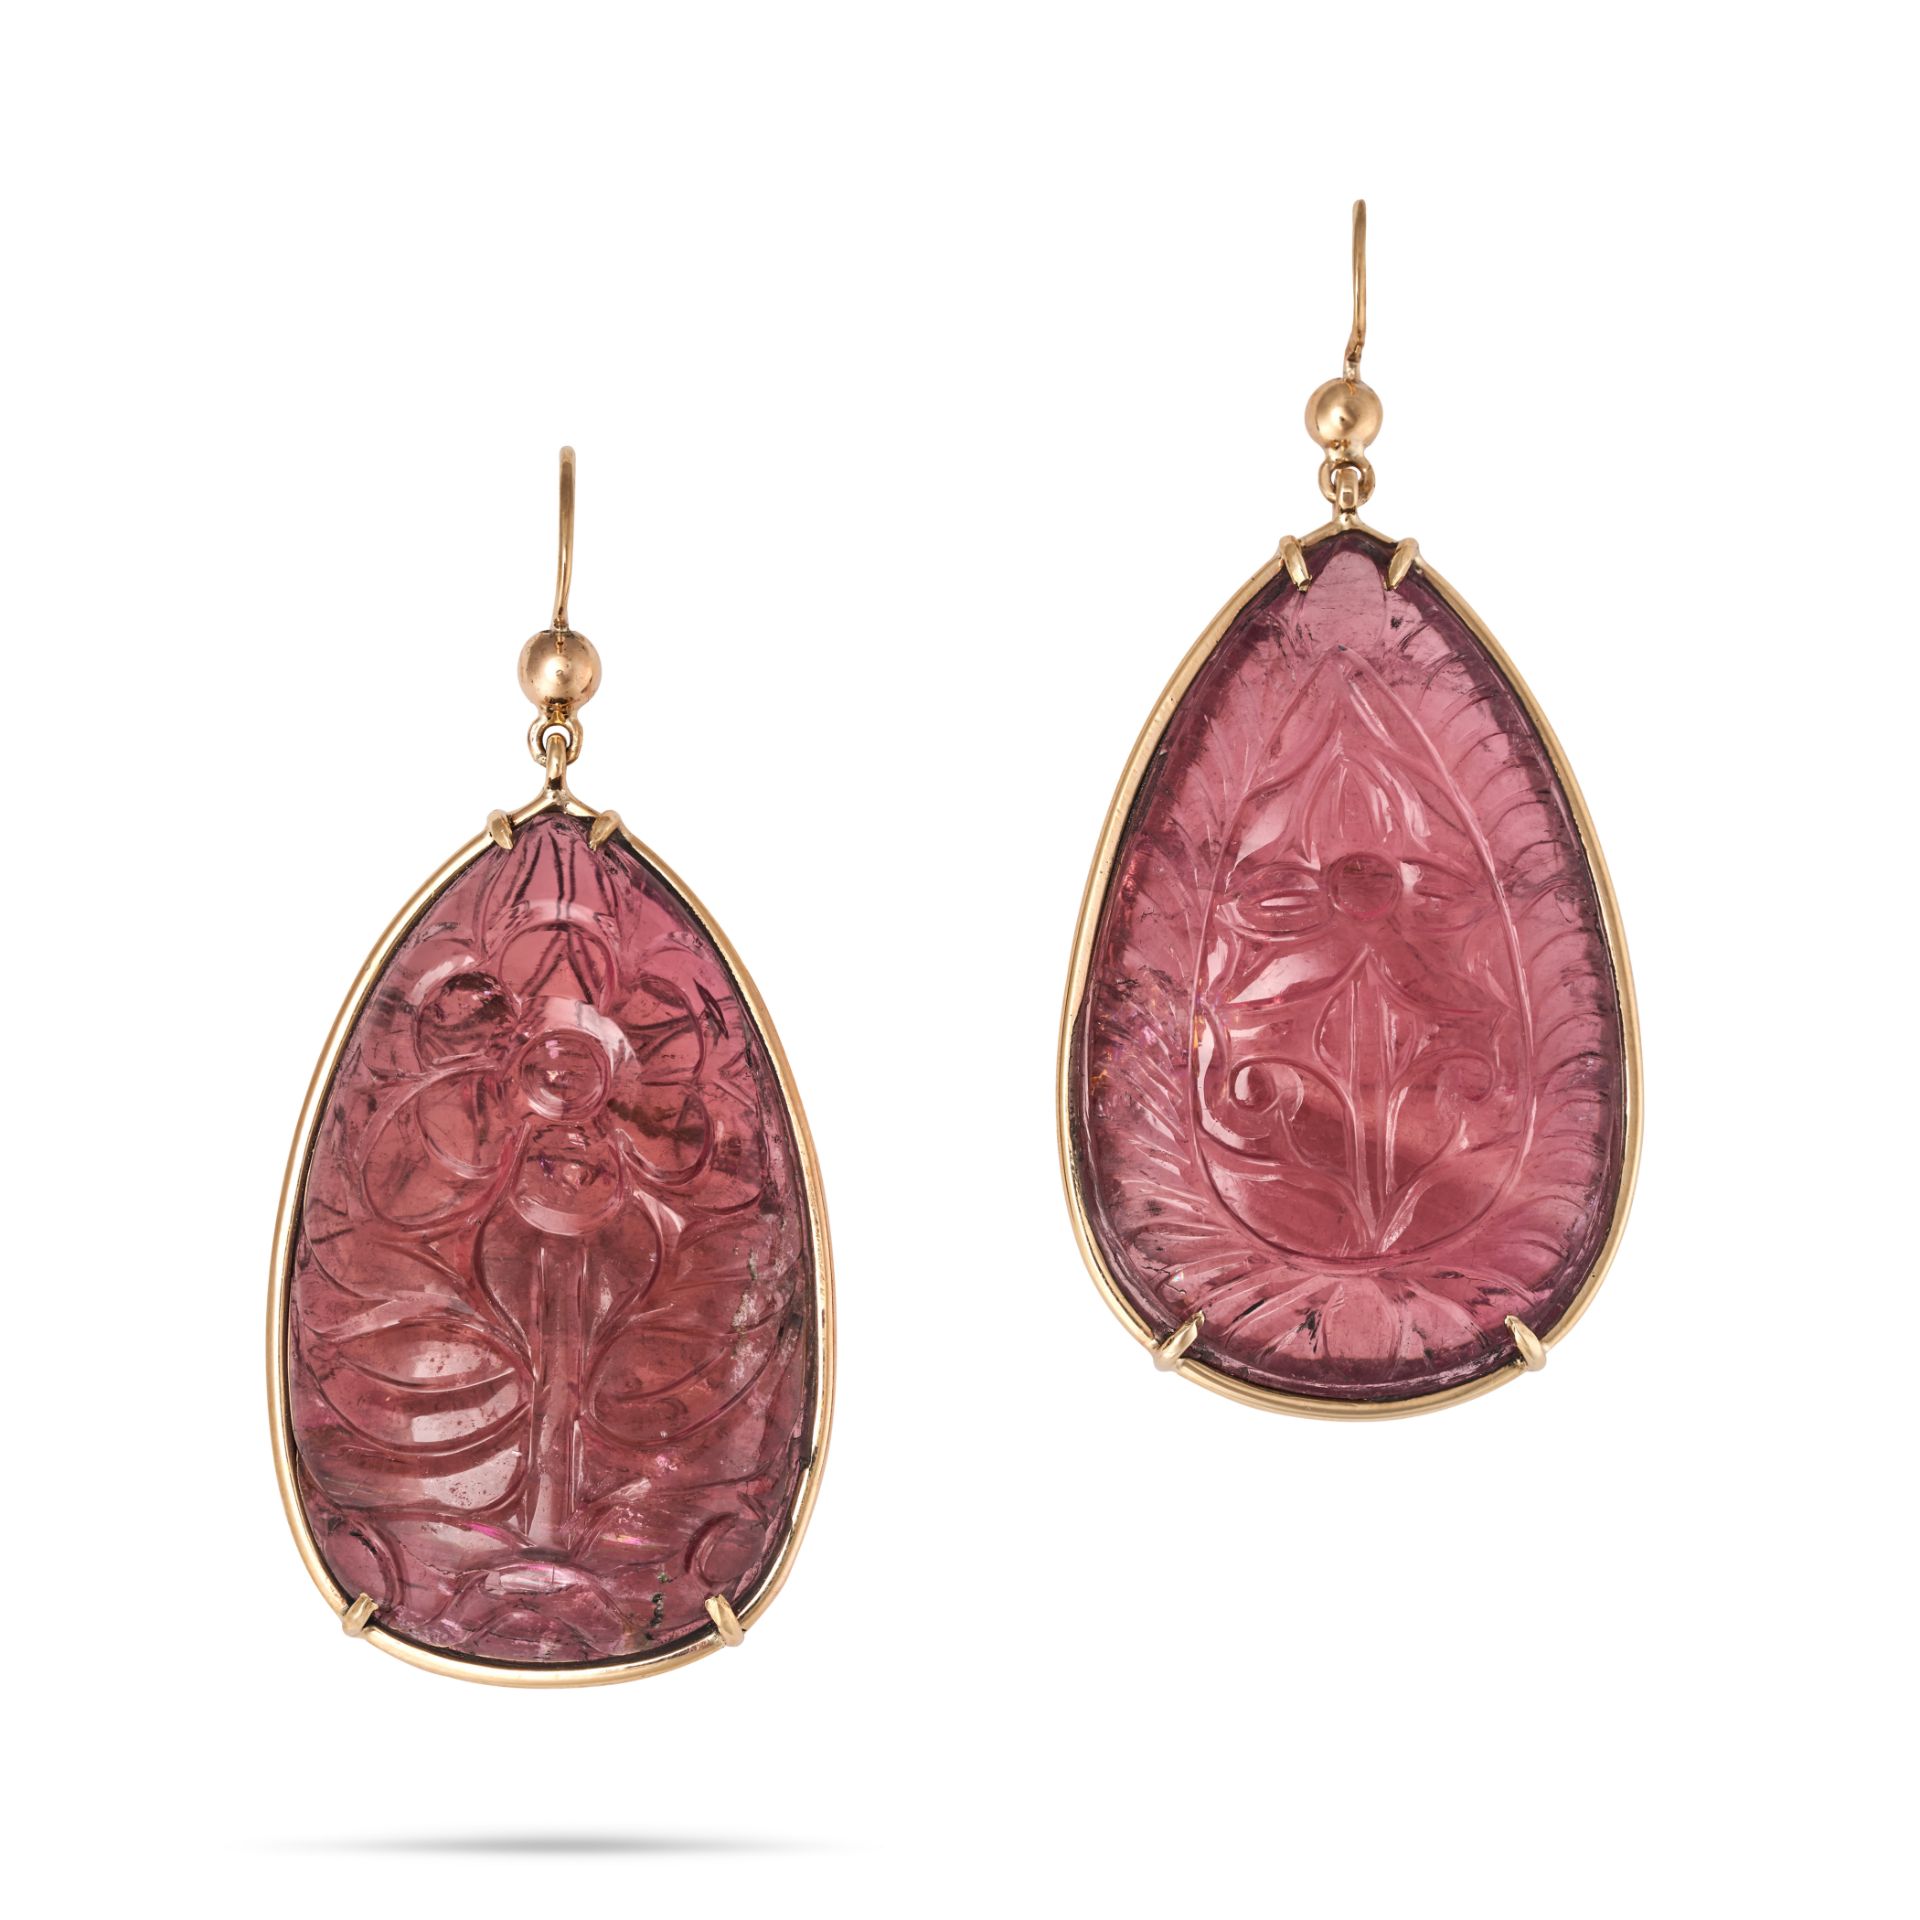 NO RESERVE - A PAIR OF PINK TOURMALINE DROP EARRINGS in yellow gold, each comprising a hook fitti...